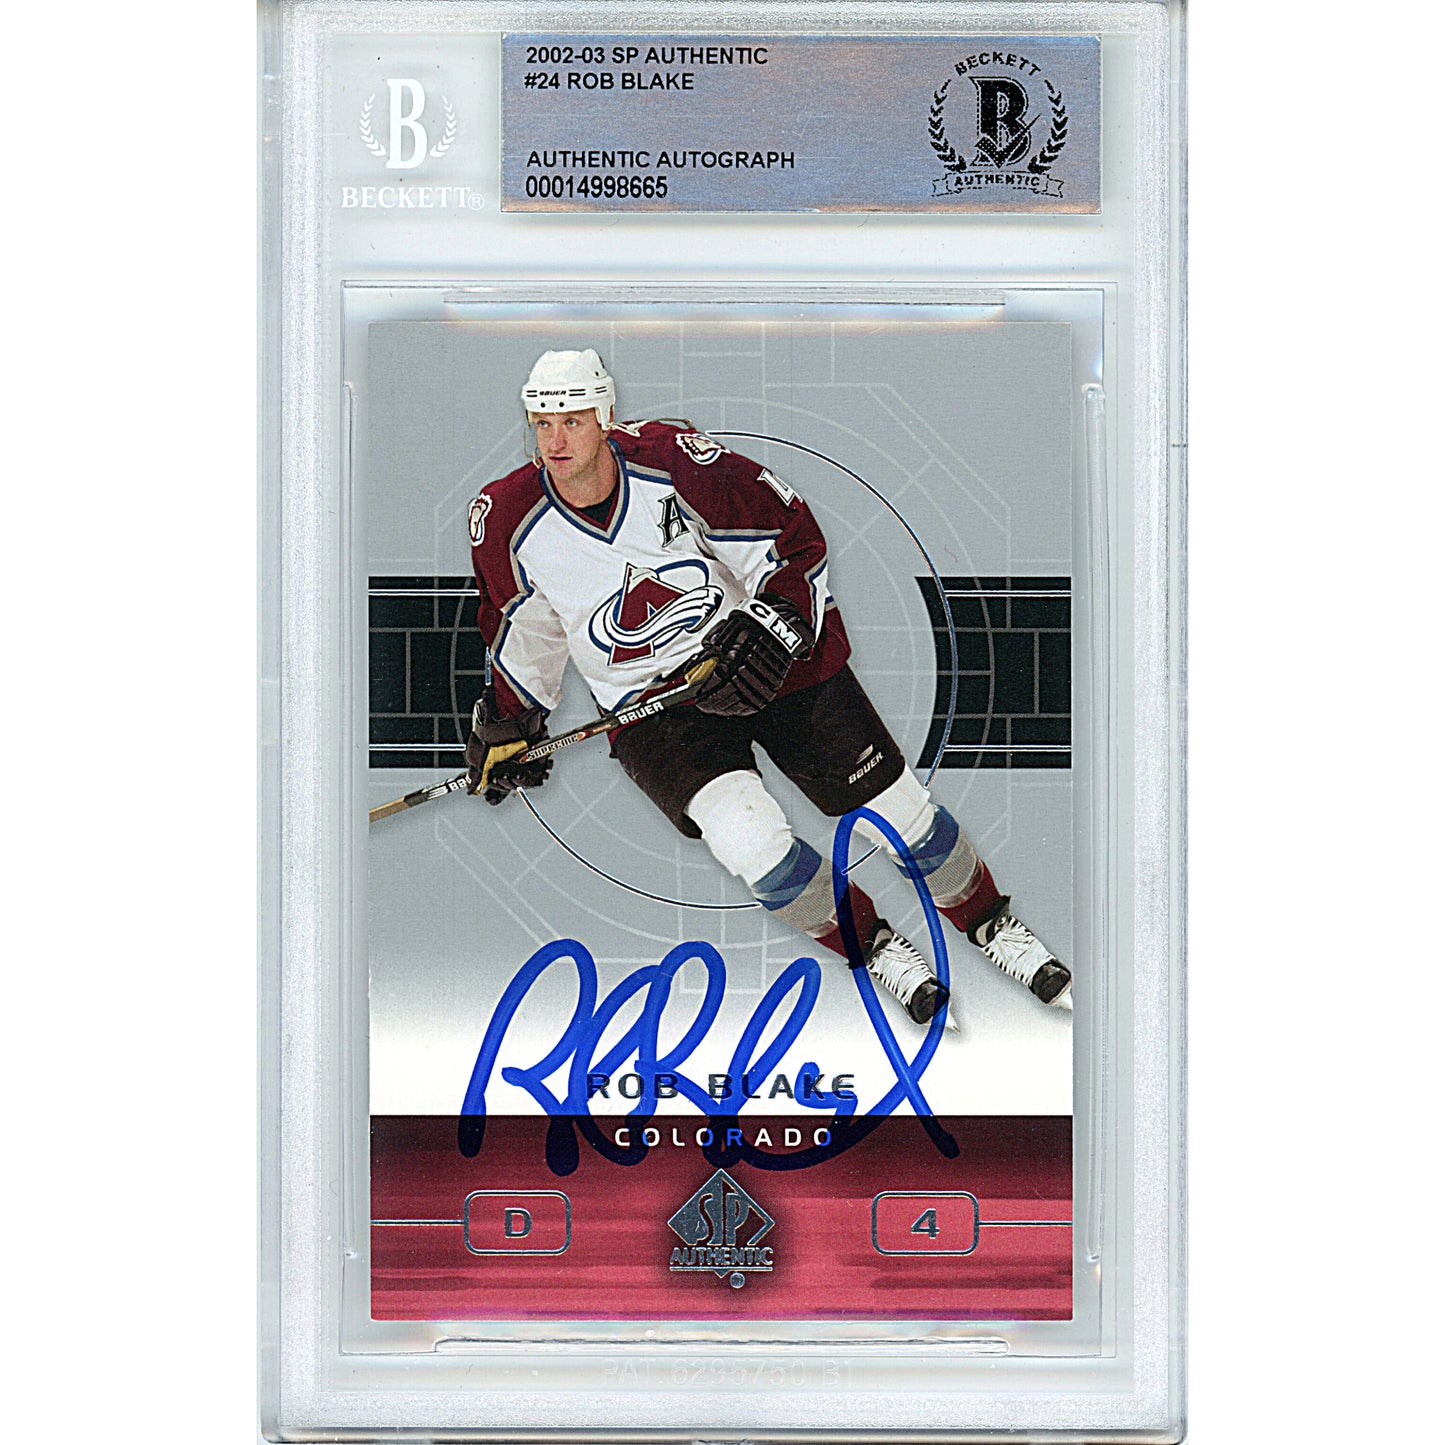 Hockey- Autographed- Rob Blake Signed Colorado Avalanche 2002-2003 Upper Deck Hockey Card Beckett Authentication Slabbed 00014998665 - 101